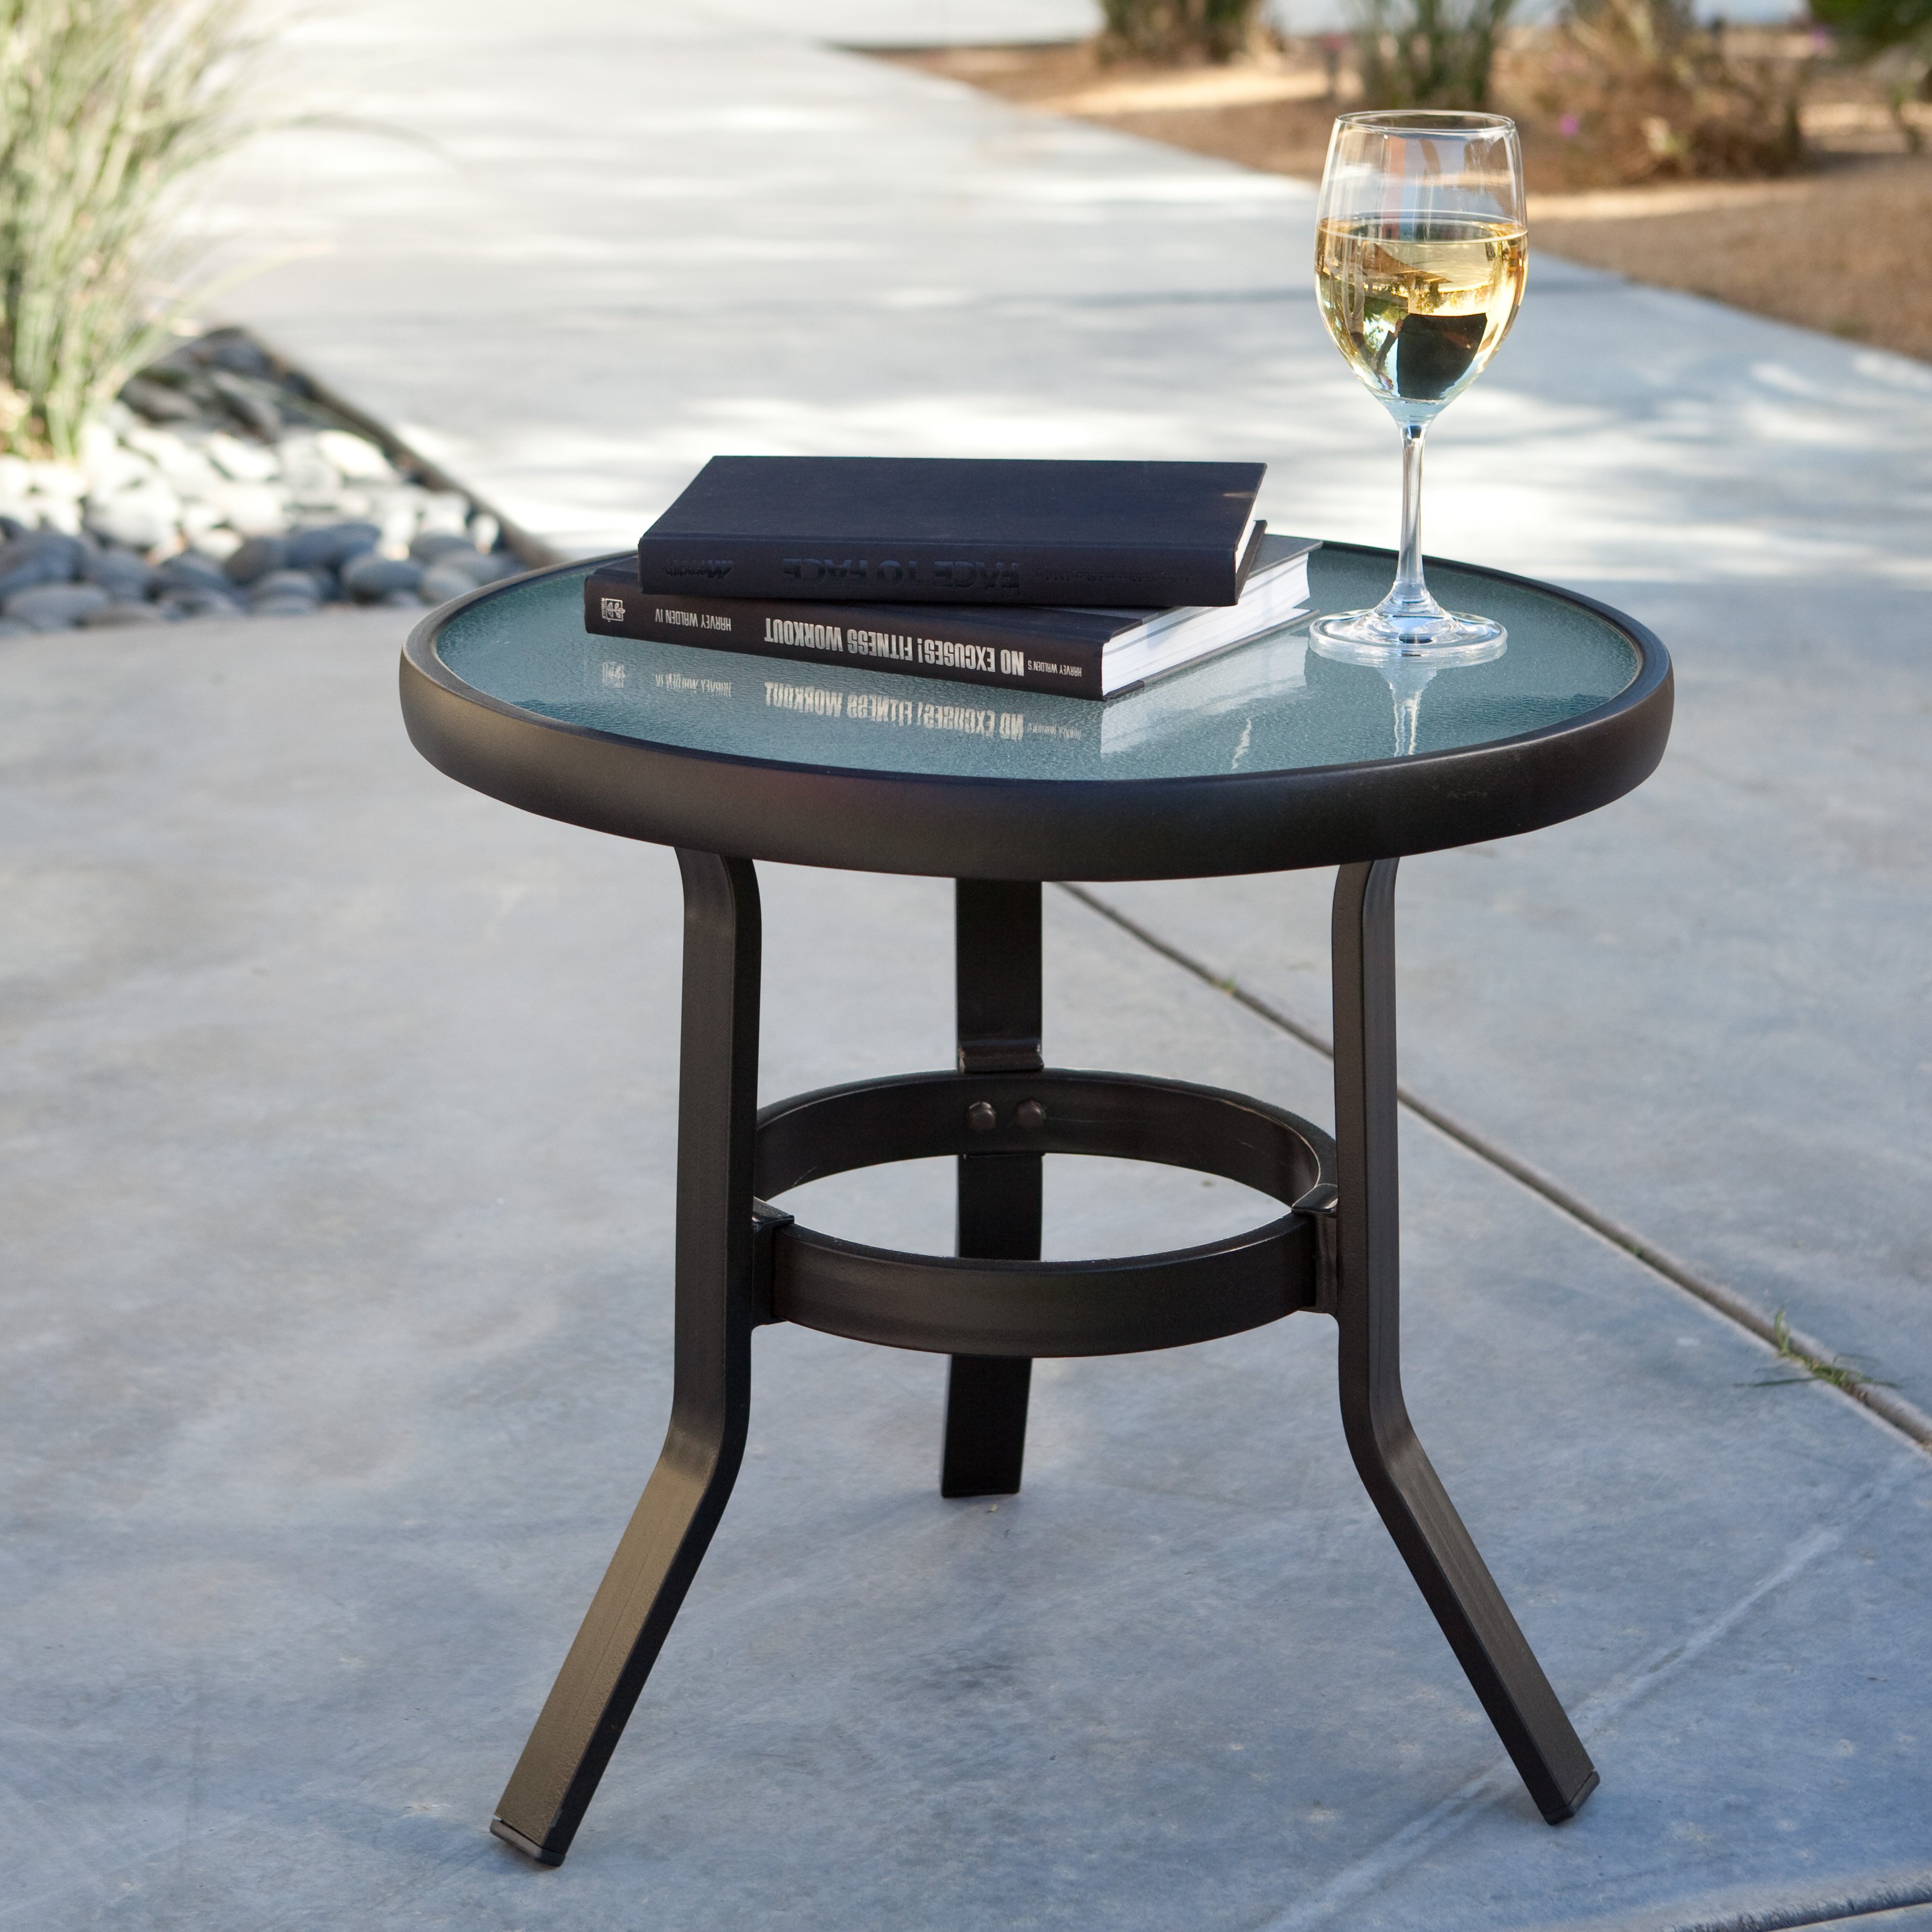 excellent modern patio side table design silver accent coral coast tables outdoor black inch tablecloth concrete coffee upcycled blue painted woodworking plans door threshold